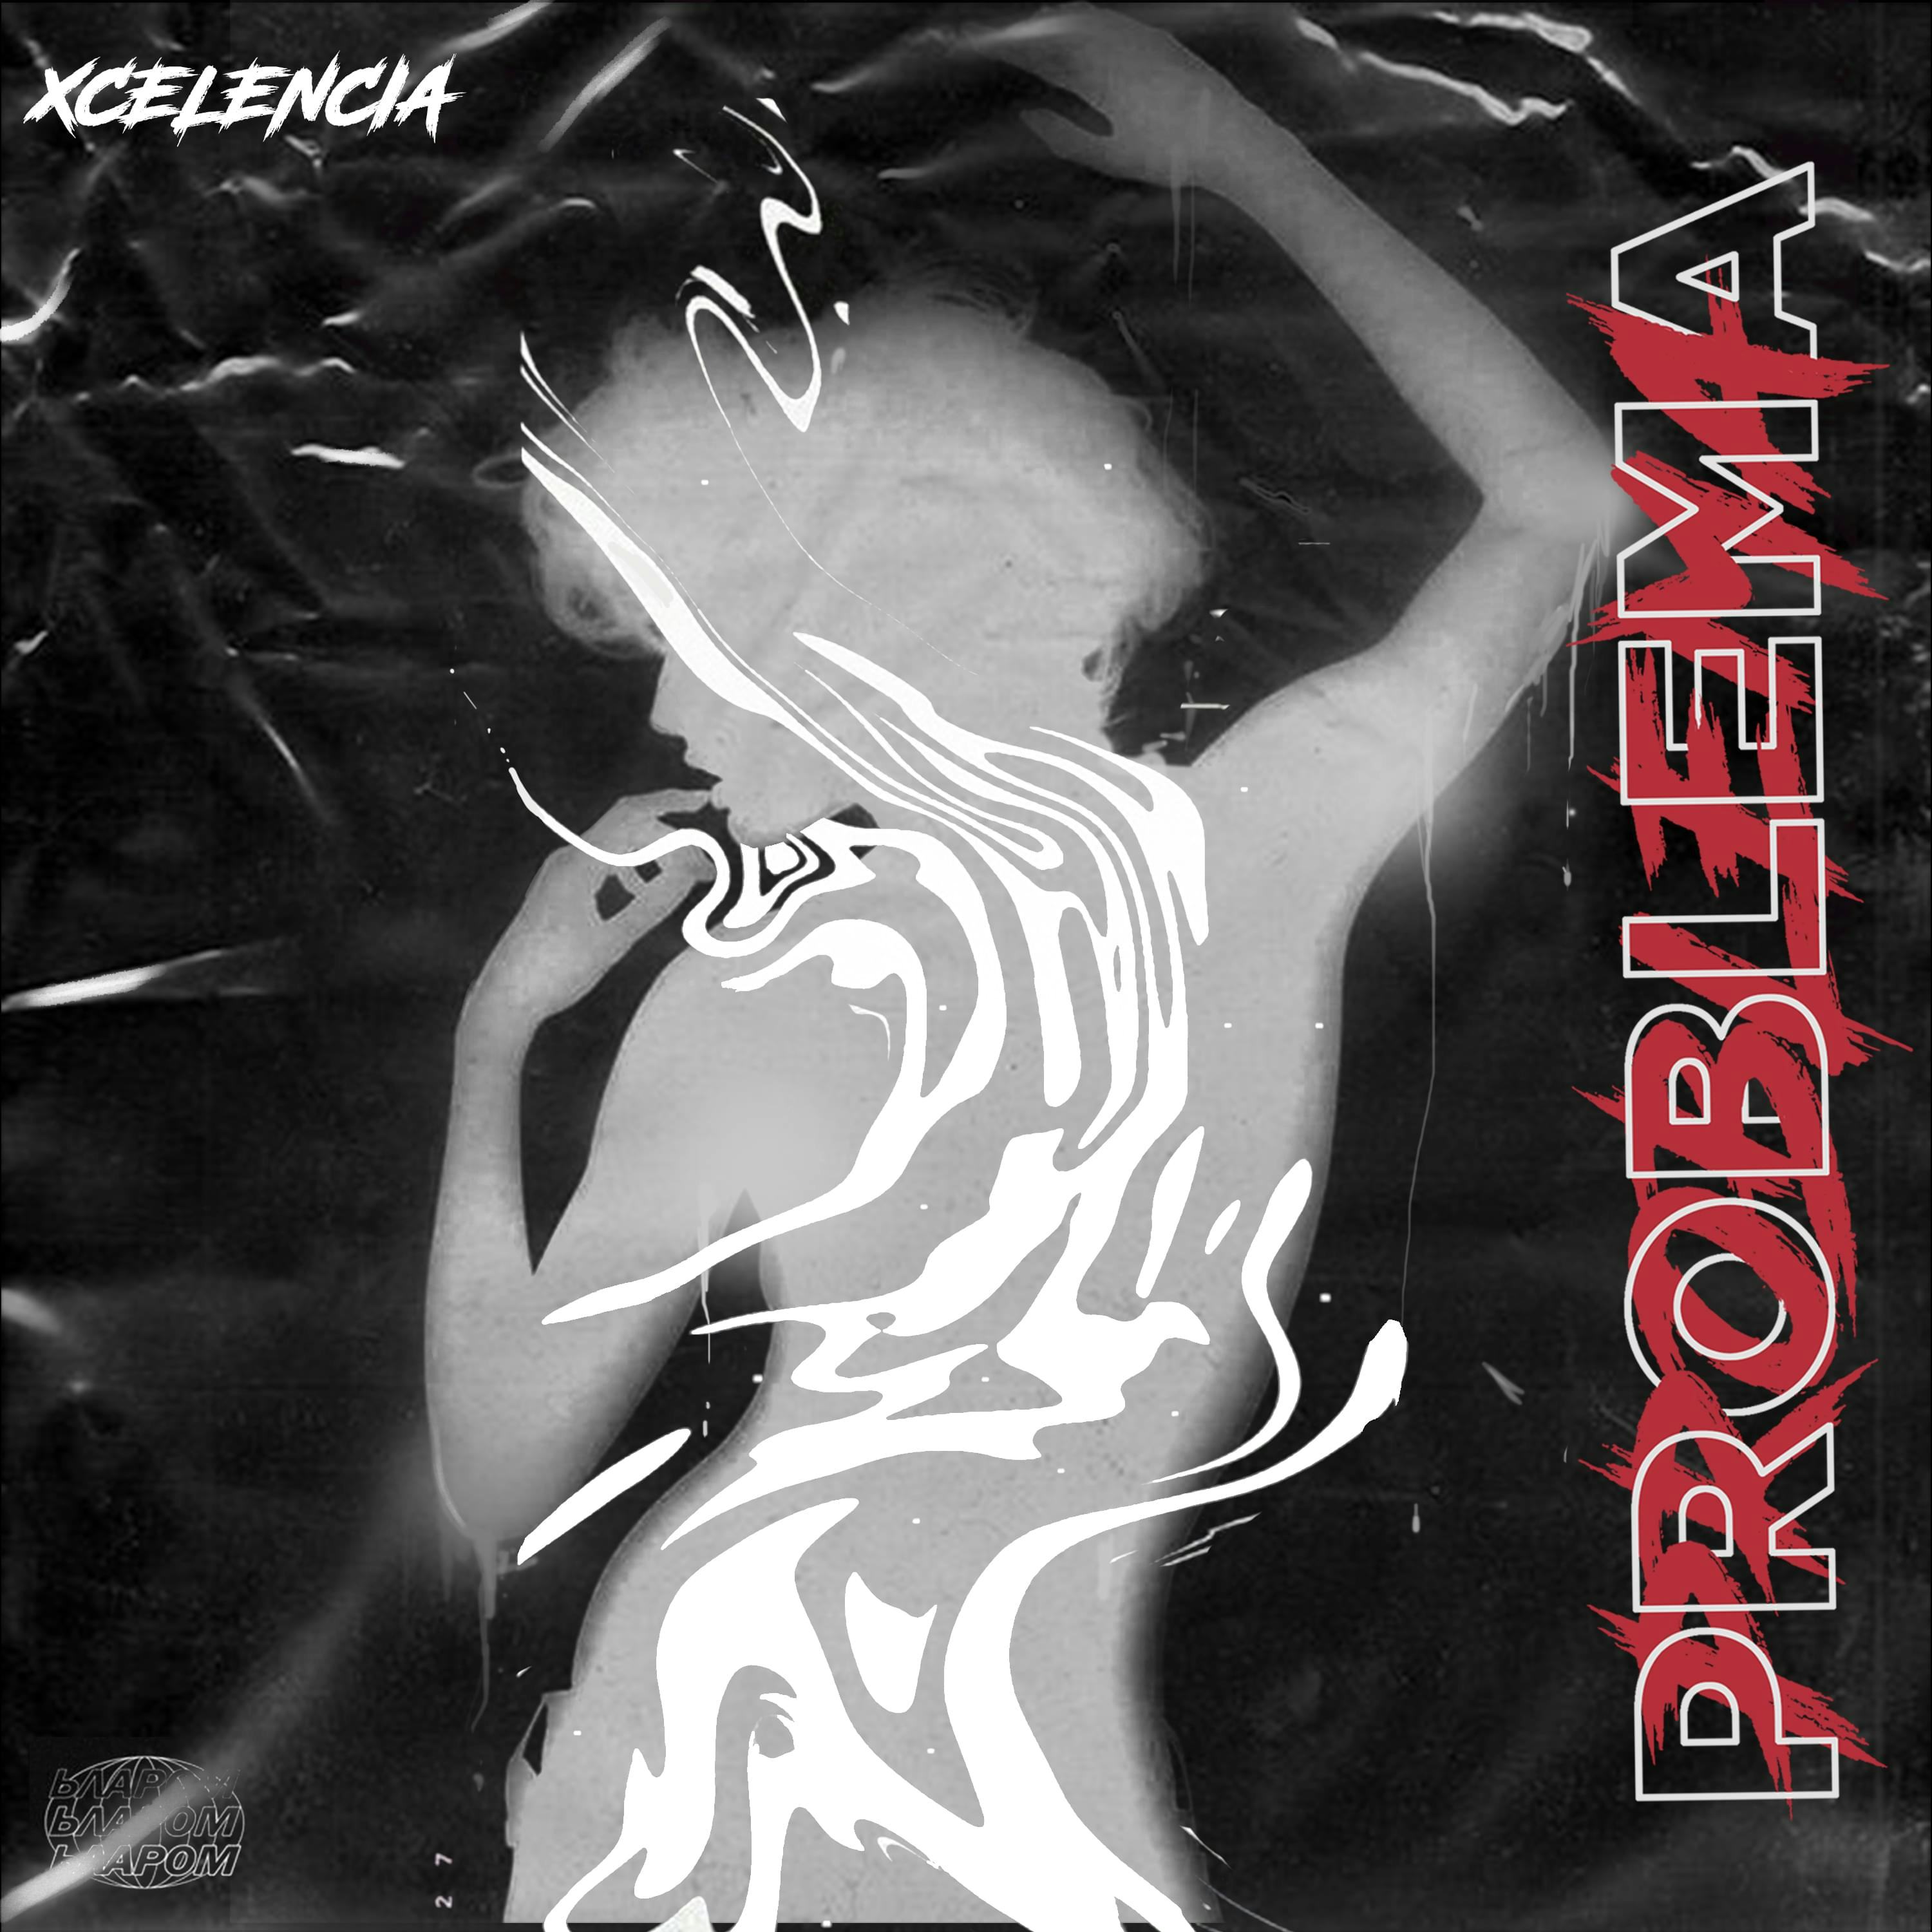 Cover art for Problema by Xcelencia